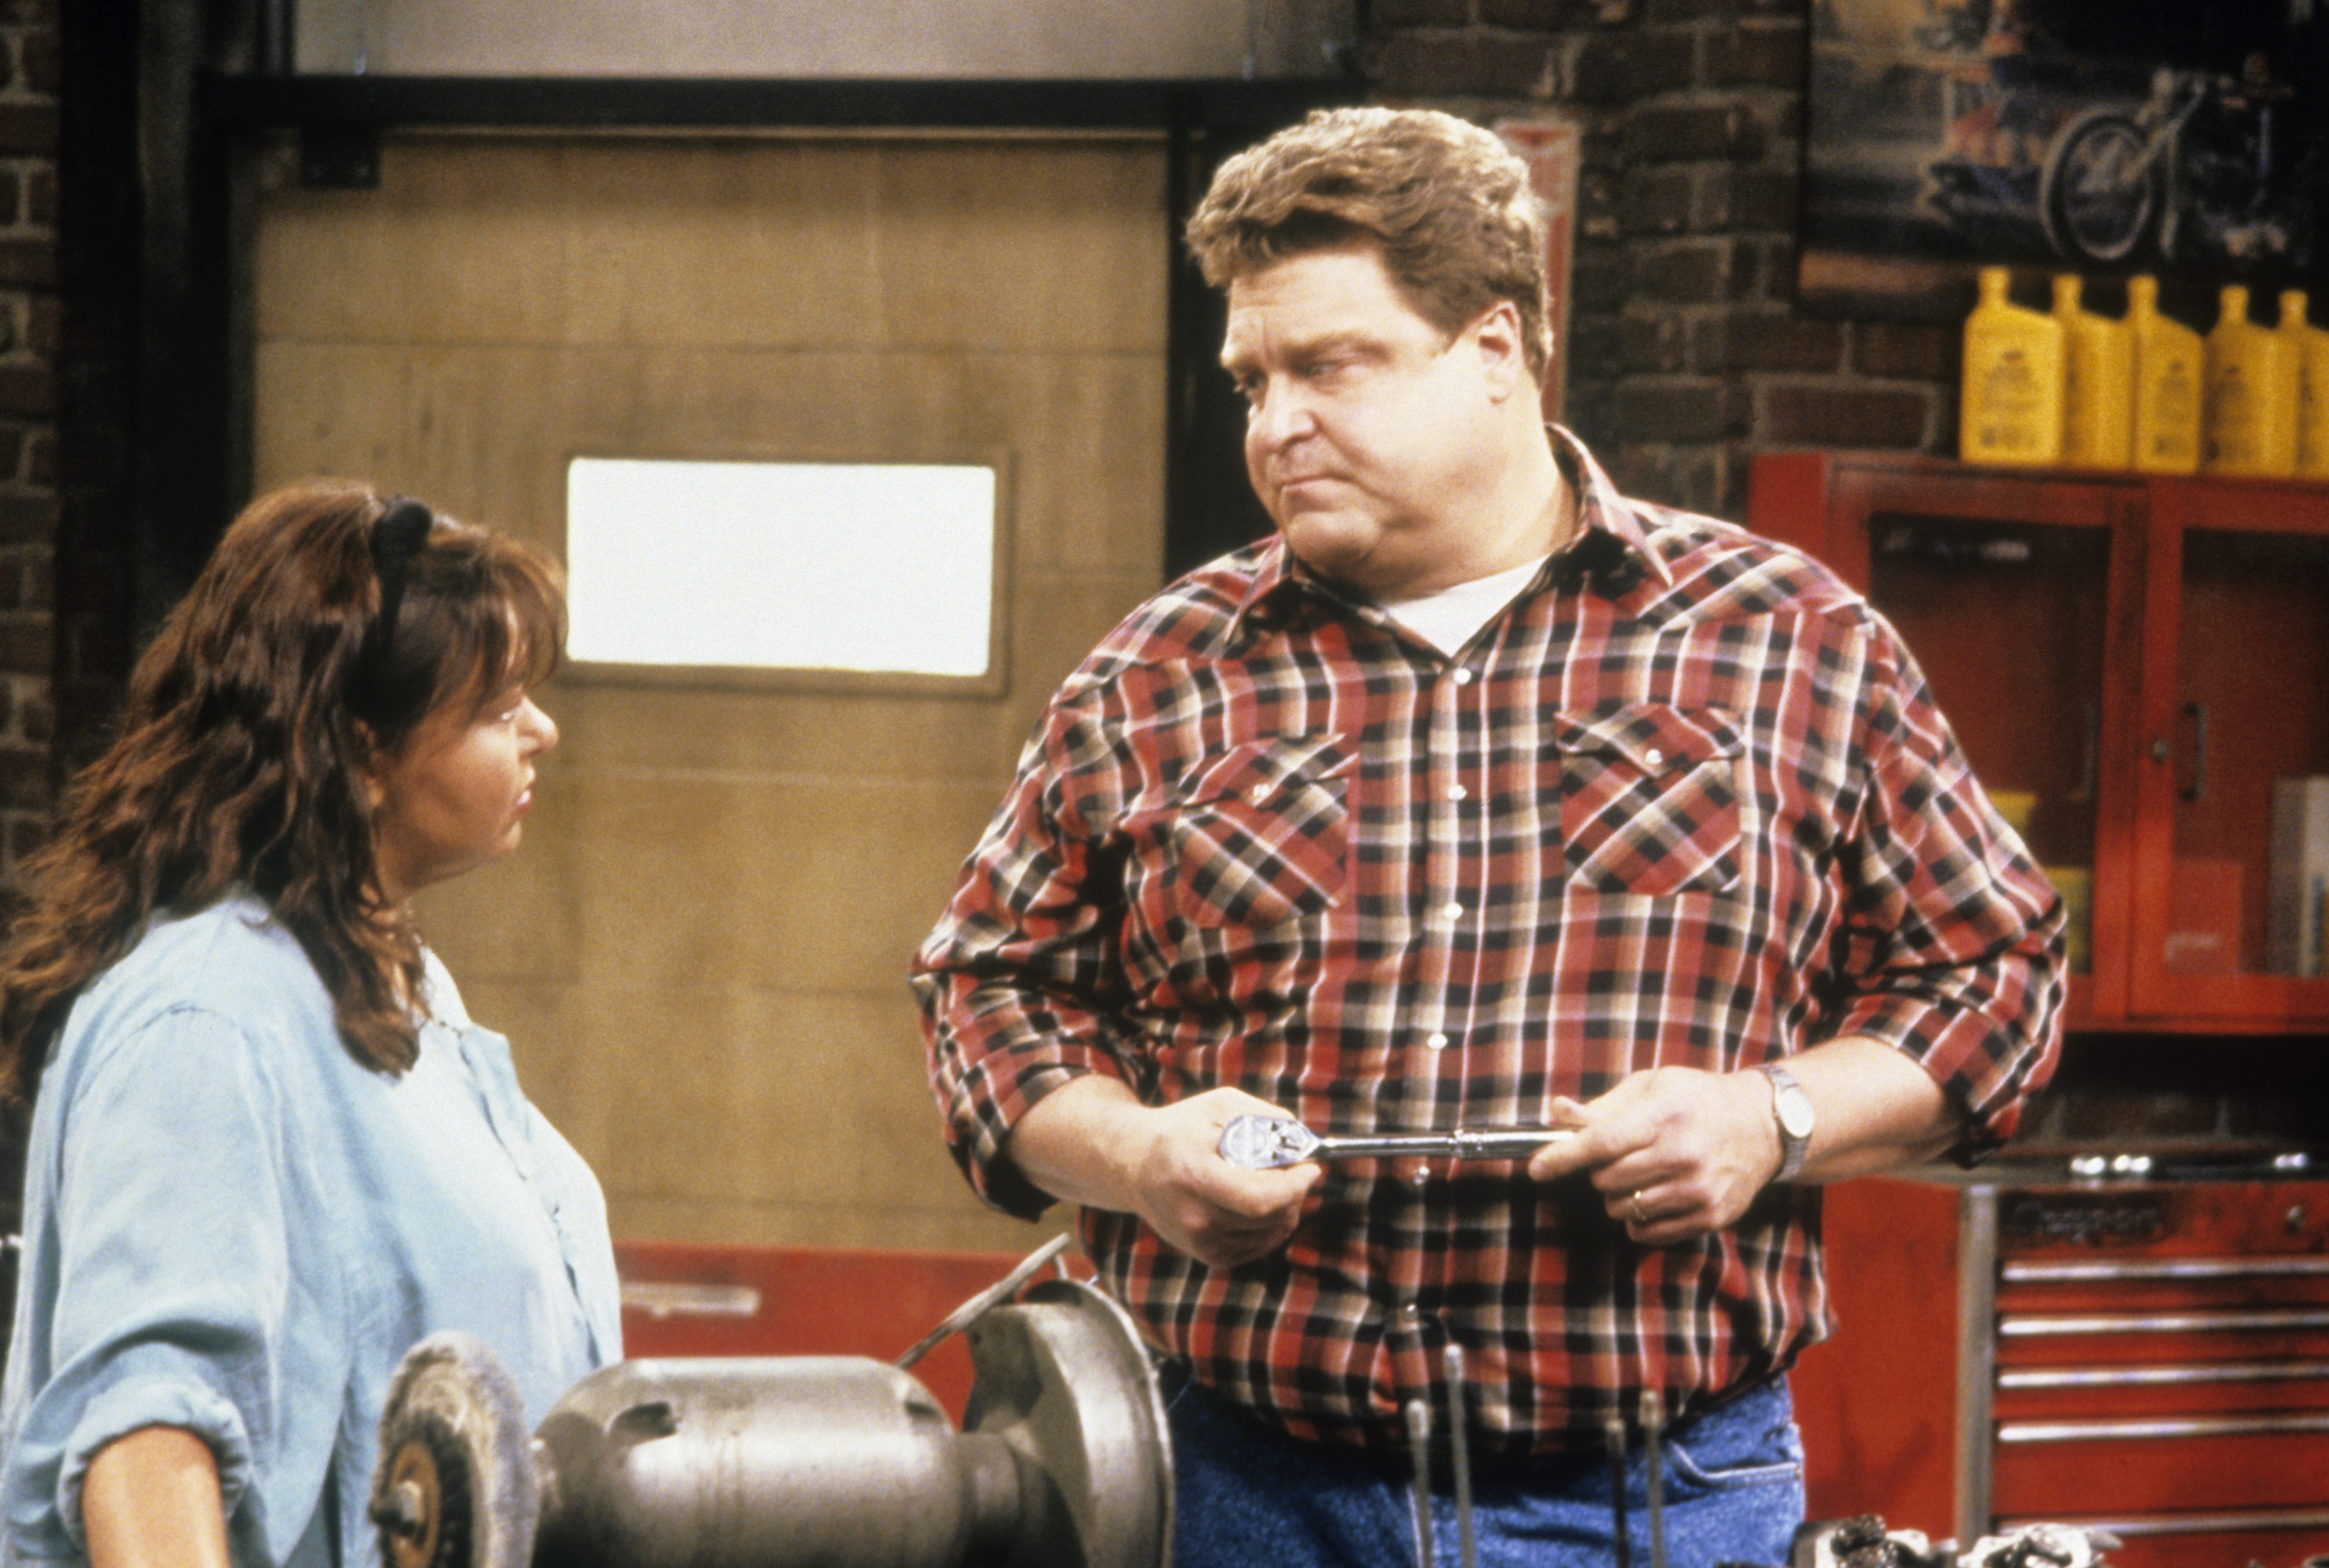 Roseanne Barr and John Goodman on the show "Roseanne" in 1992 | Source: Getty Images